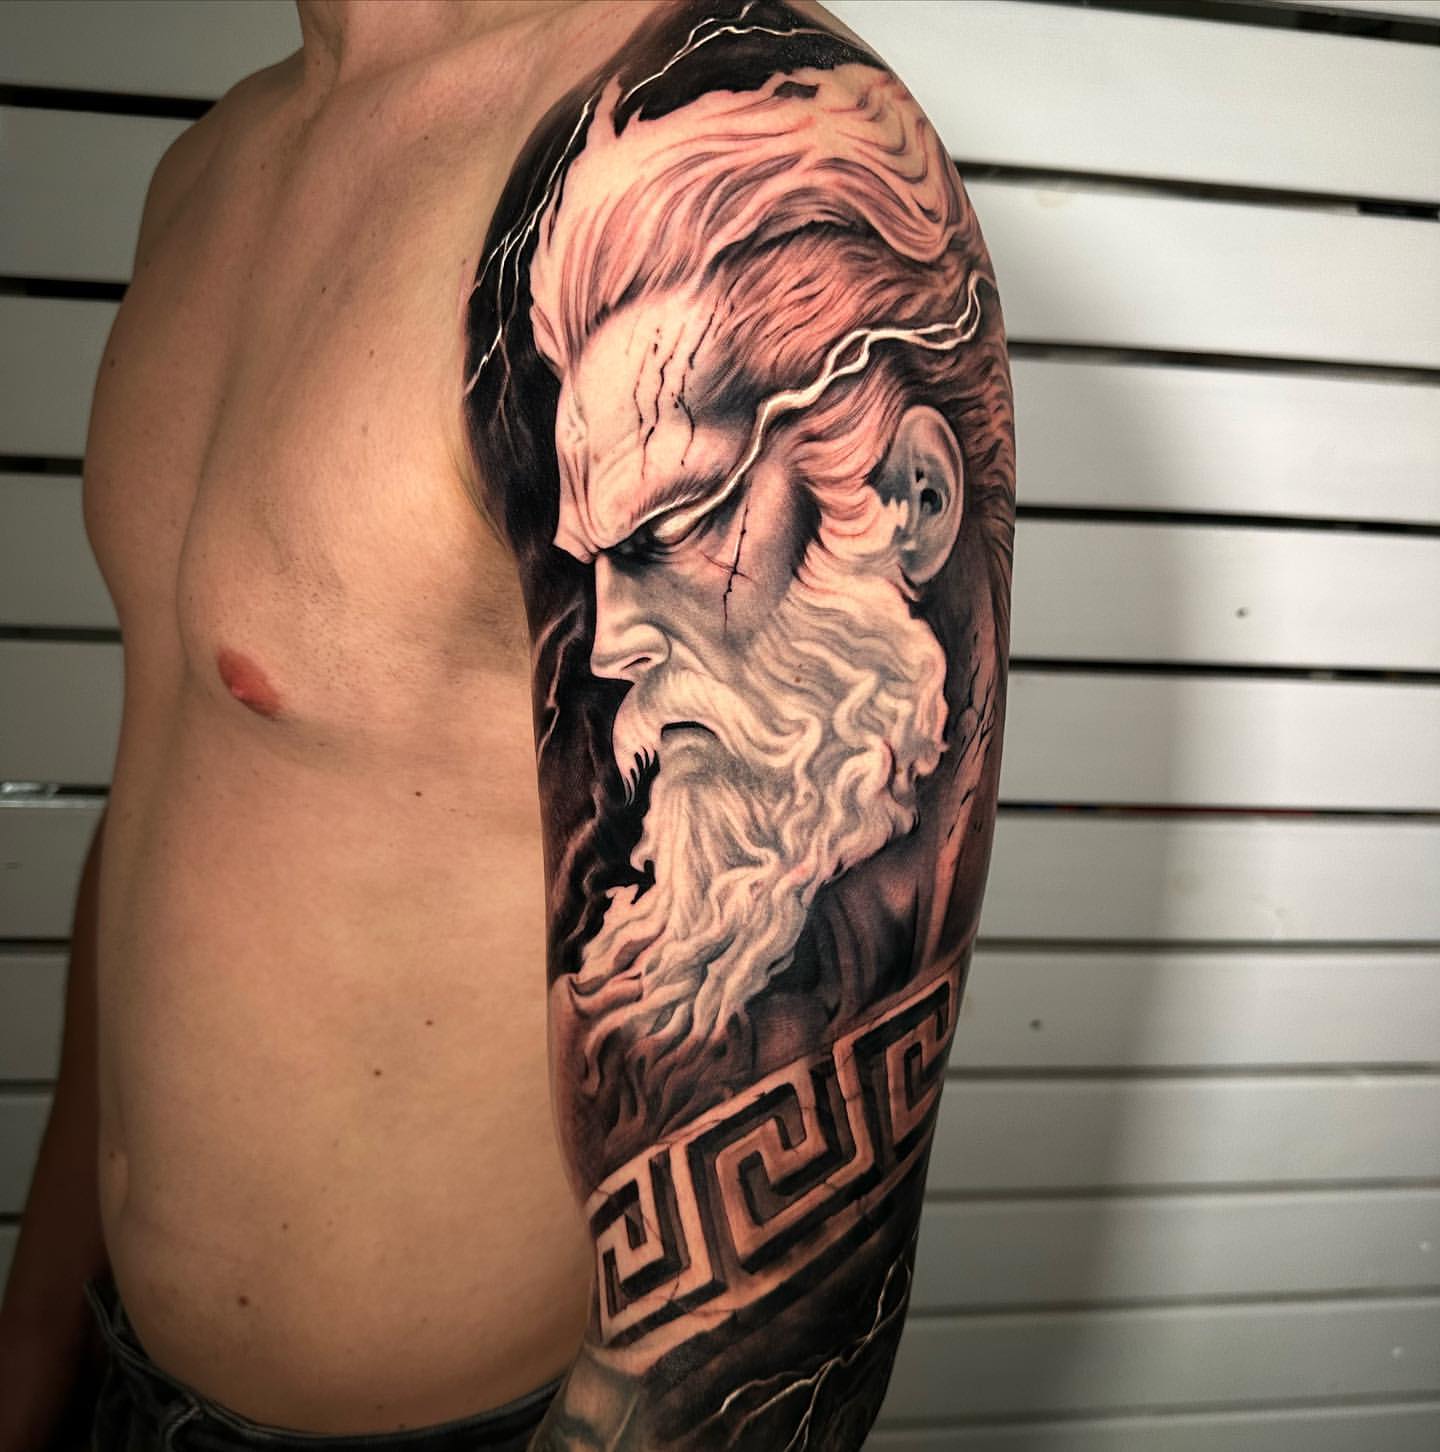 Zeus, a detail from a... - The Travelling Tattoo Artist | Facebook